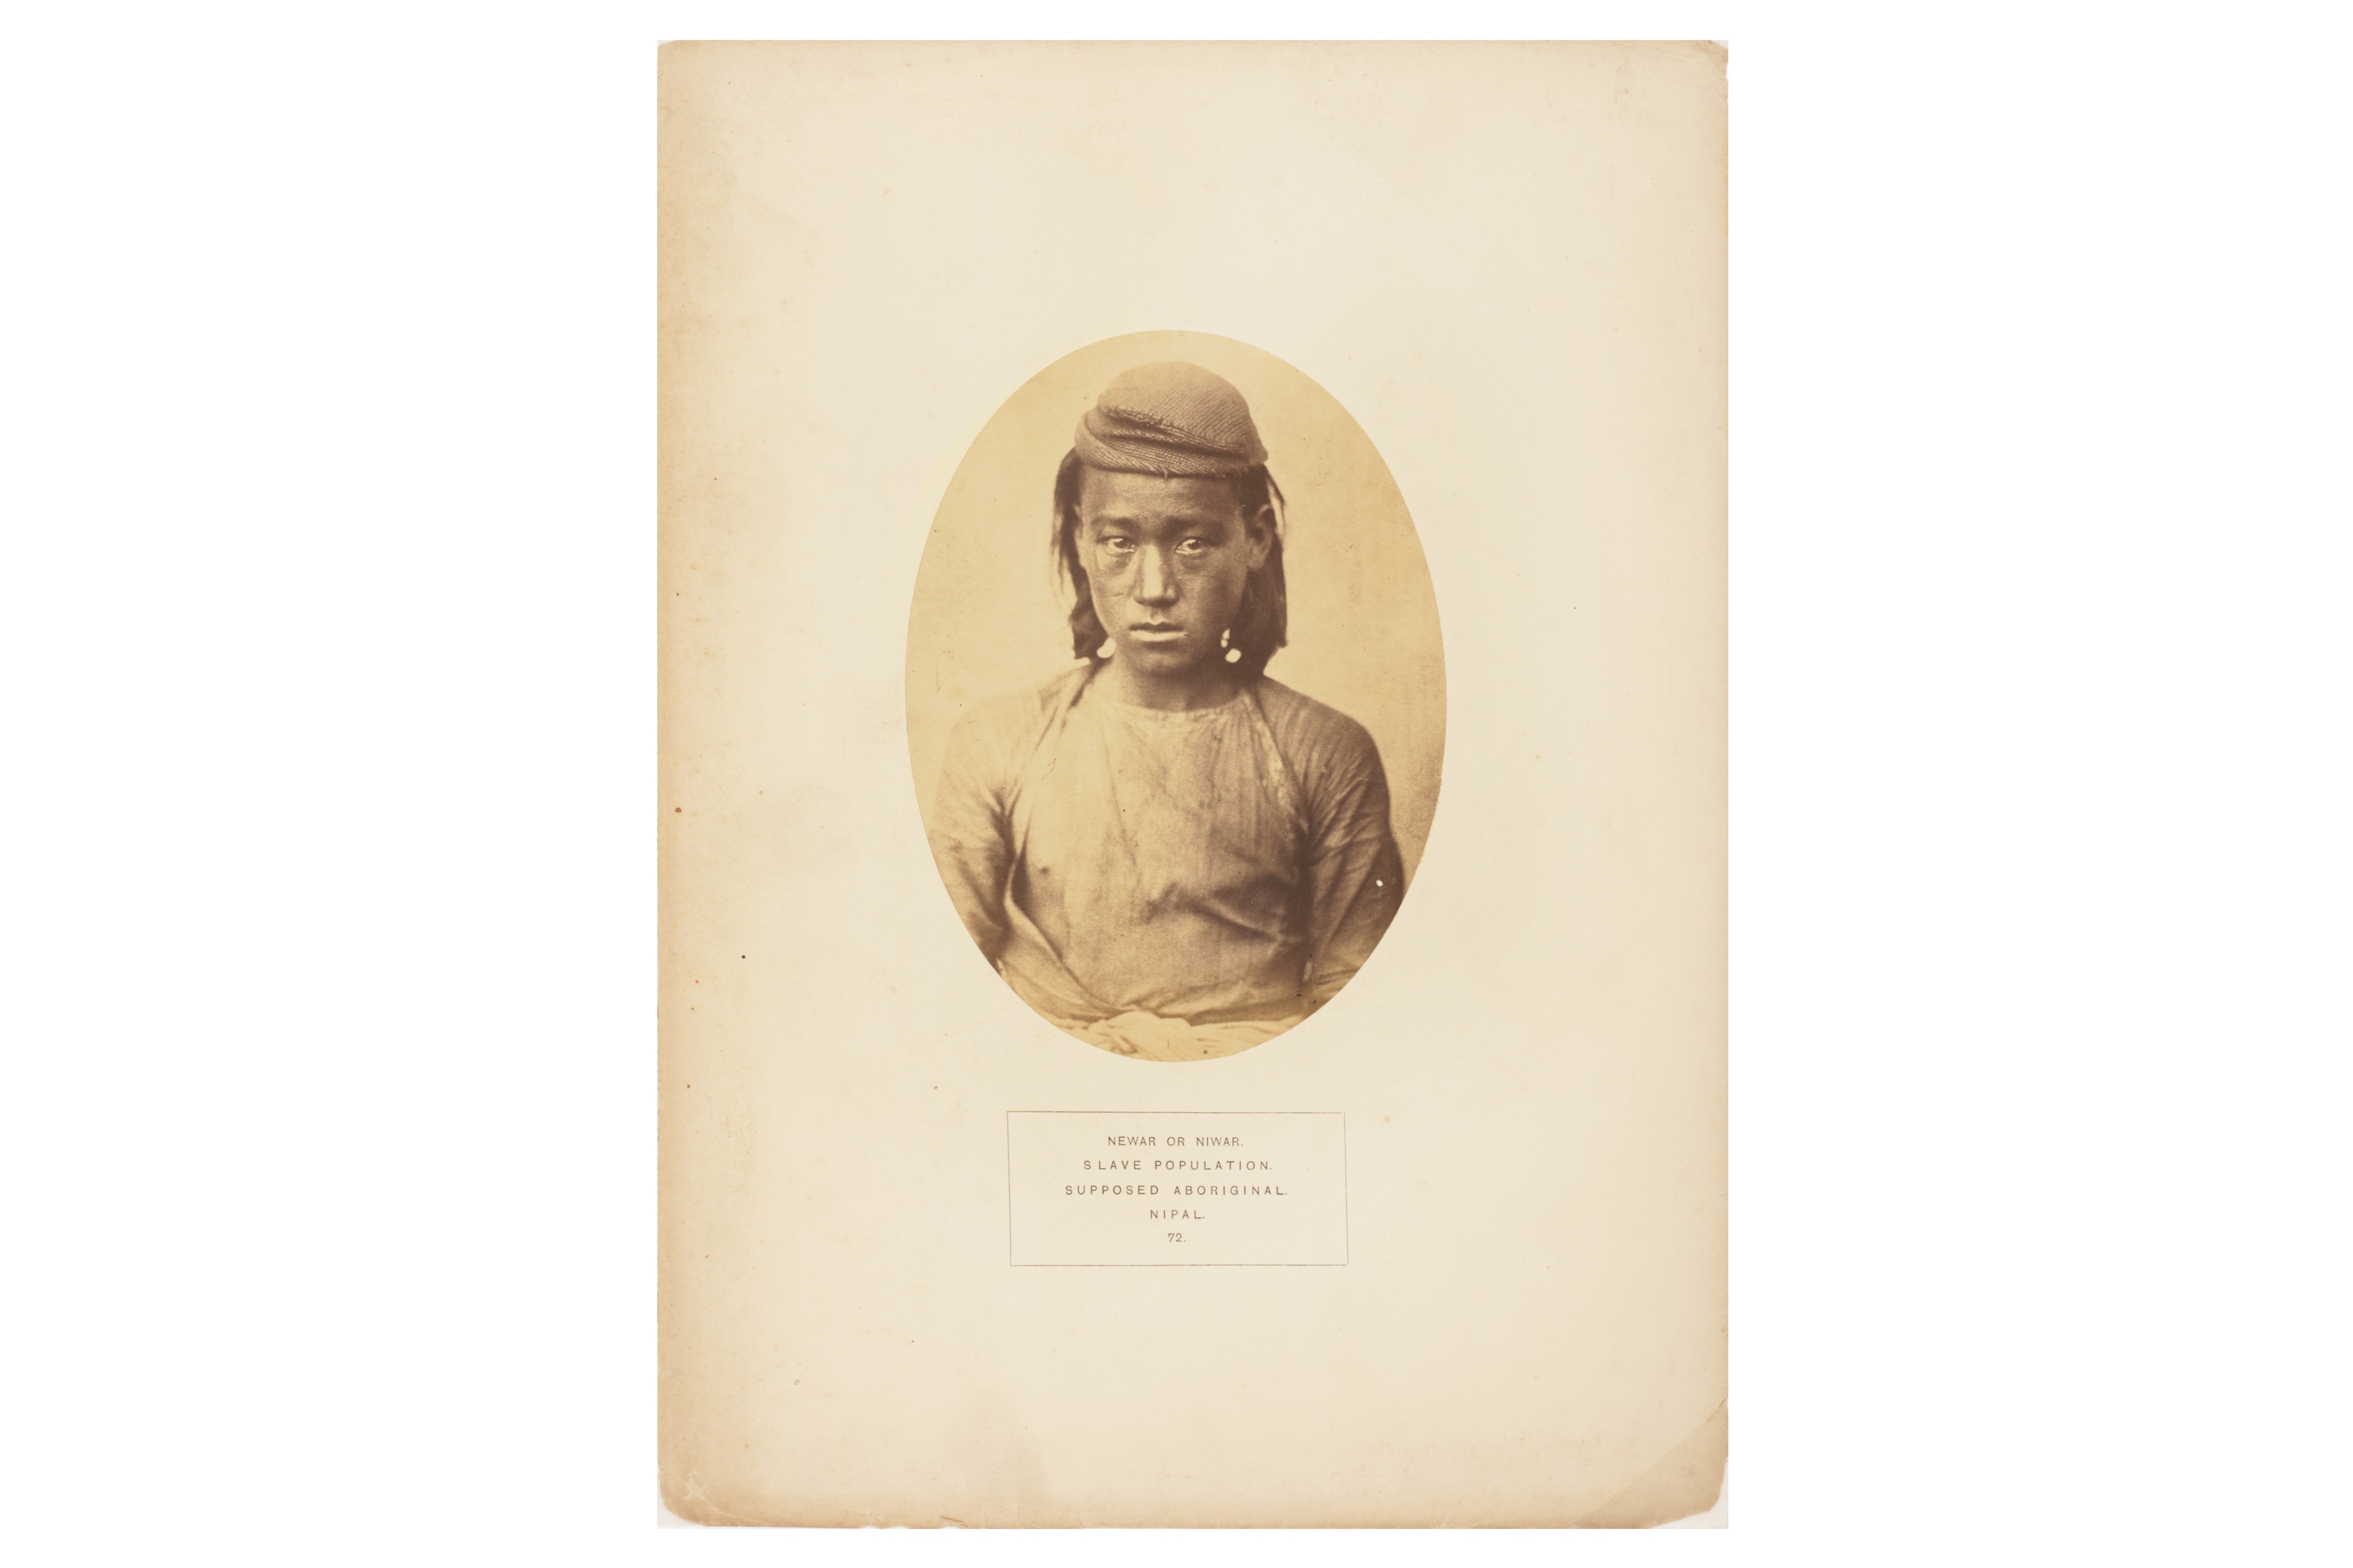 THE PEOPLE OF INDIA: A SERIES OF PHOTOGRAPHIC ILLUSTRATIONS ca. 1868 - 1875